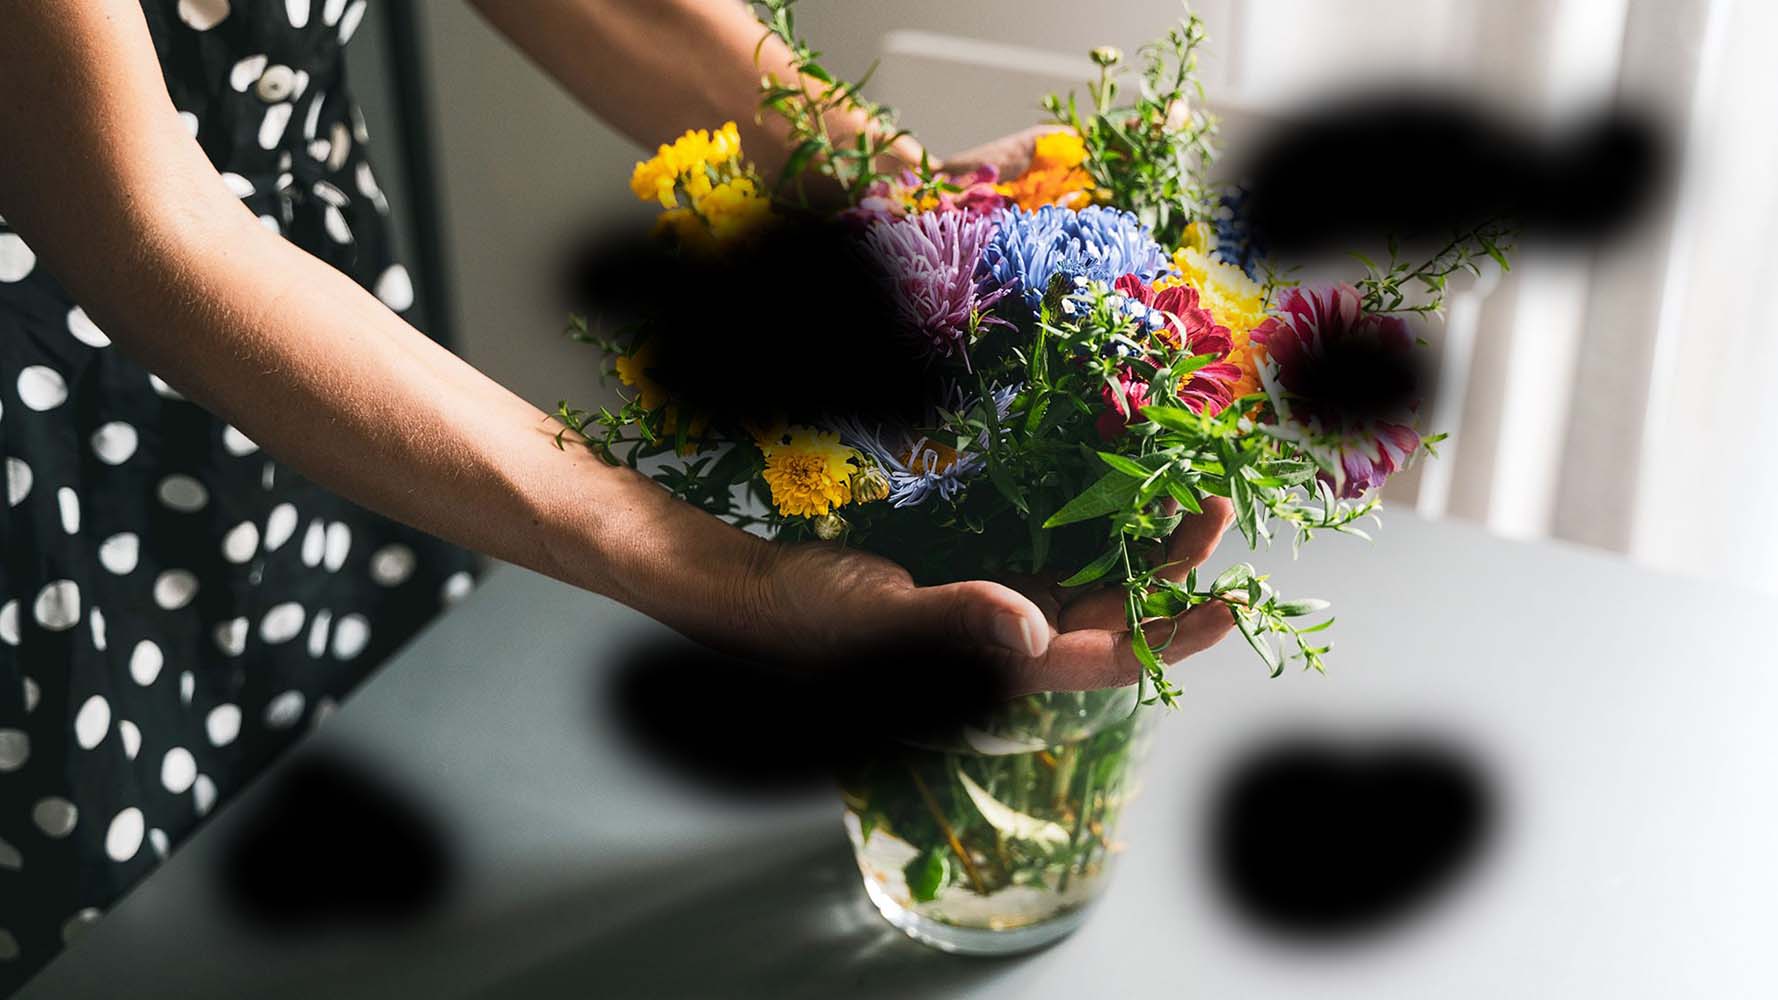 Hands holding flowers, with areas of black blotches obstructing the image, to indicate what a person with diabetic retinopathy might experience.